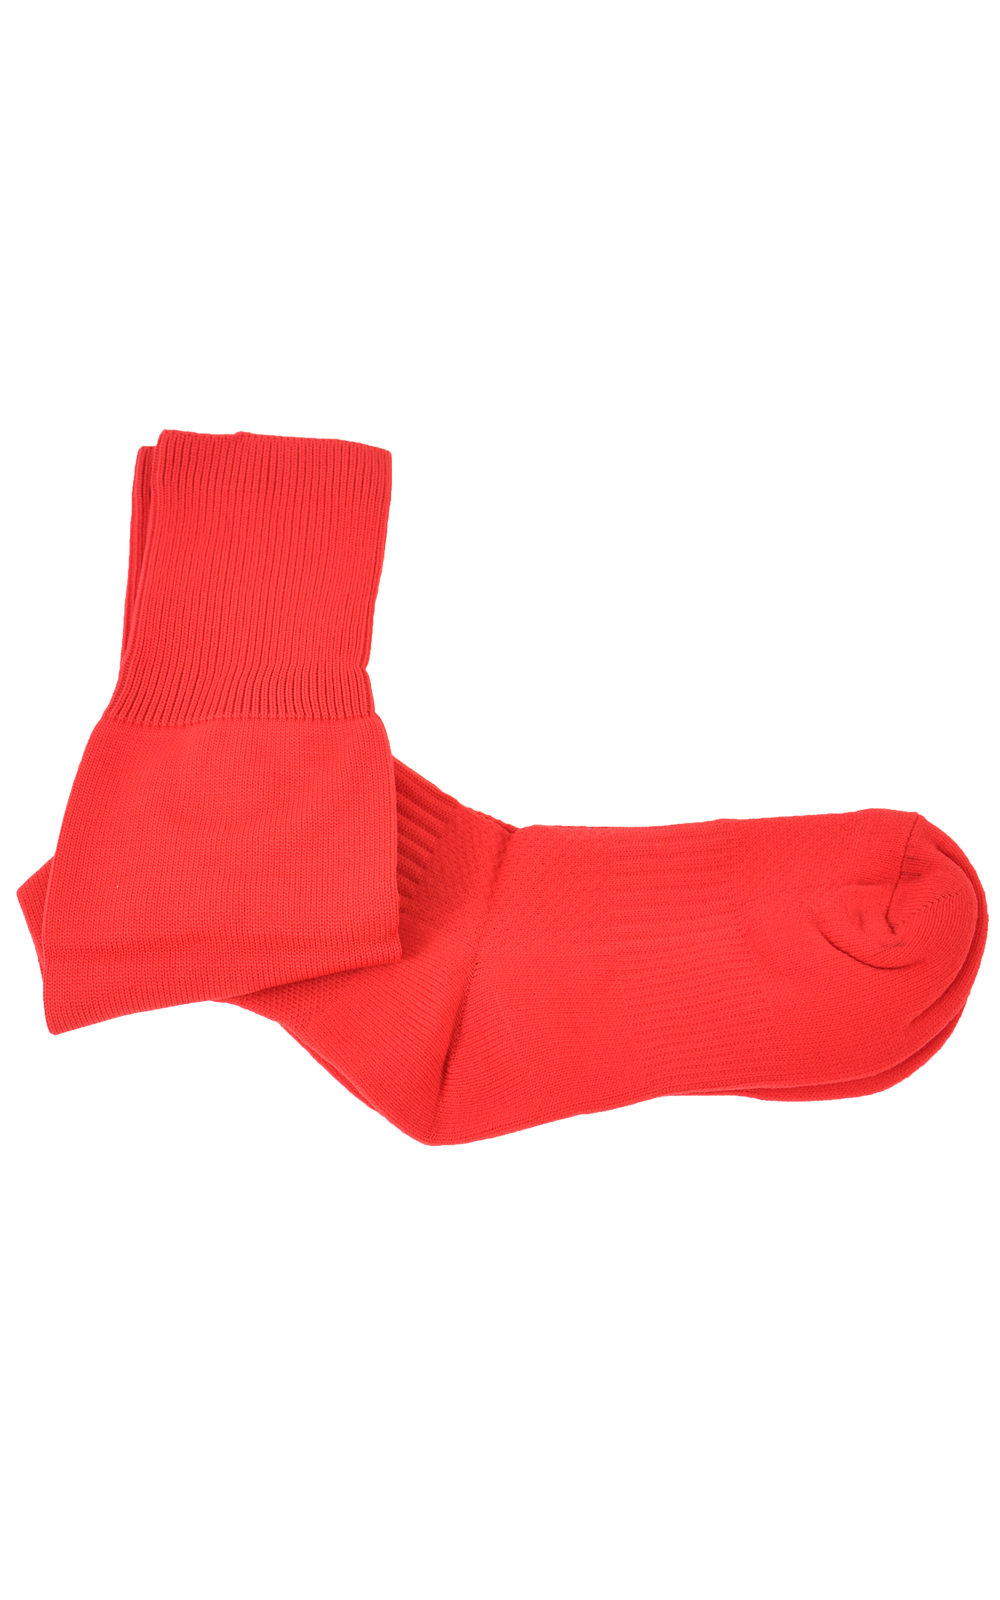 Picture of Plain Red Sports Socks - Blue Max